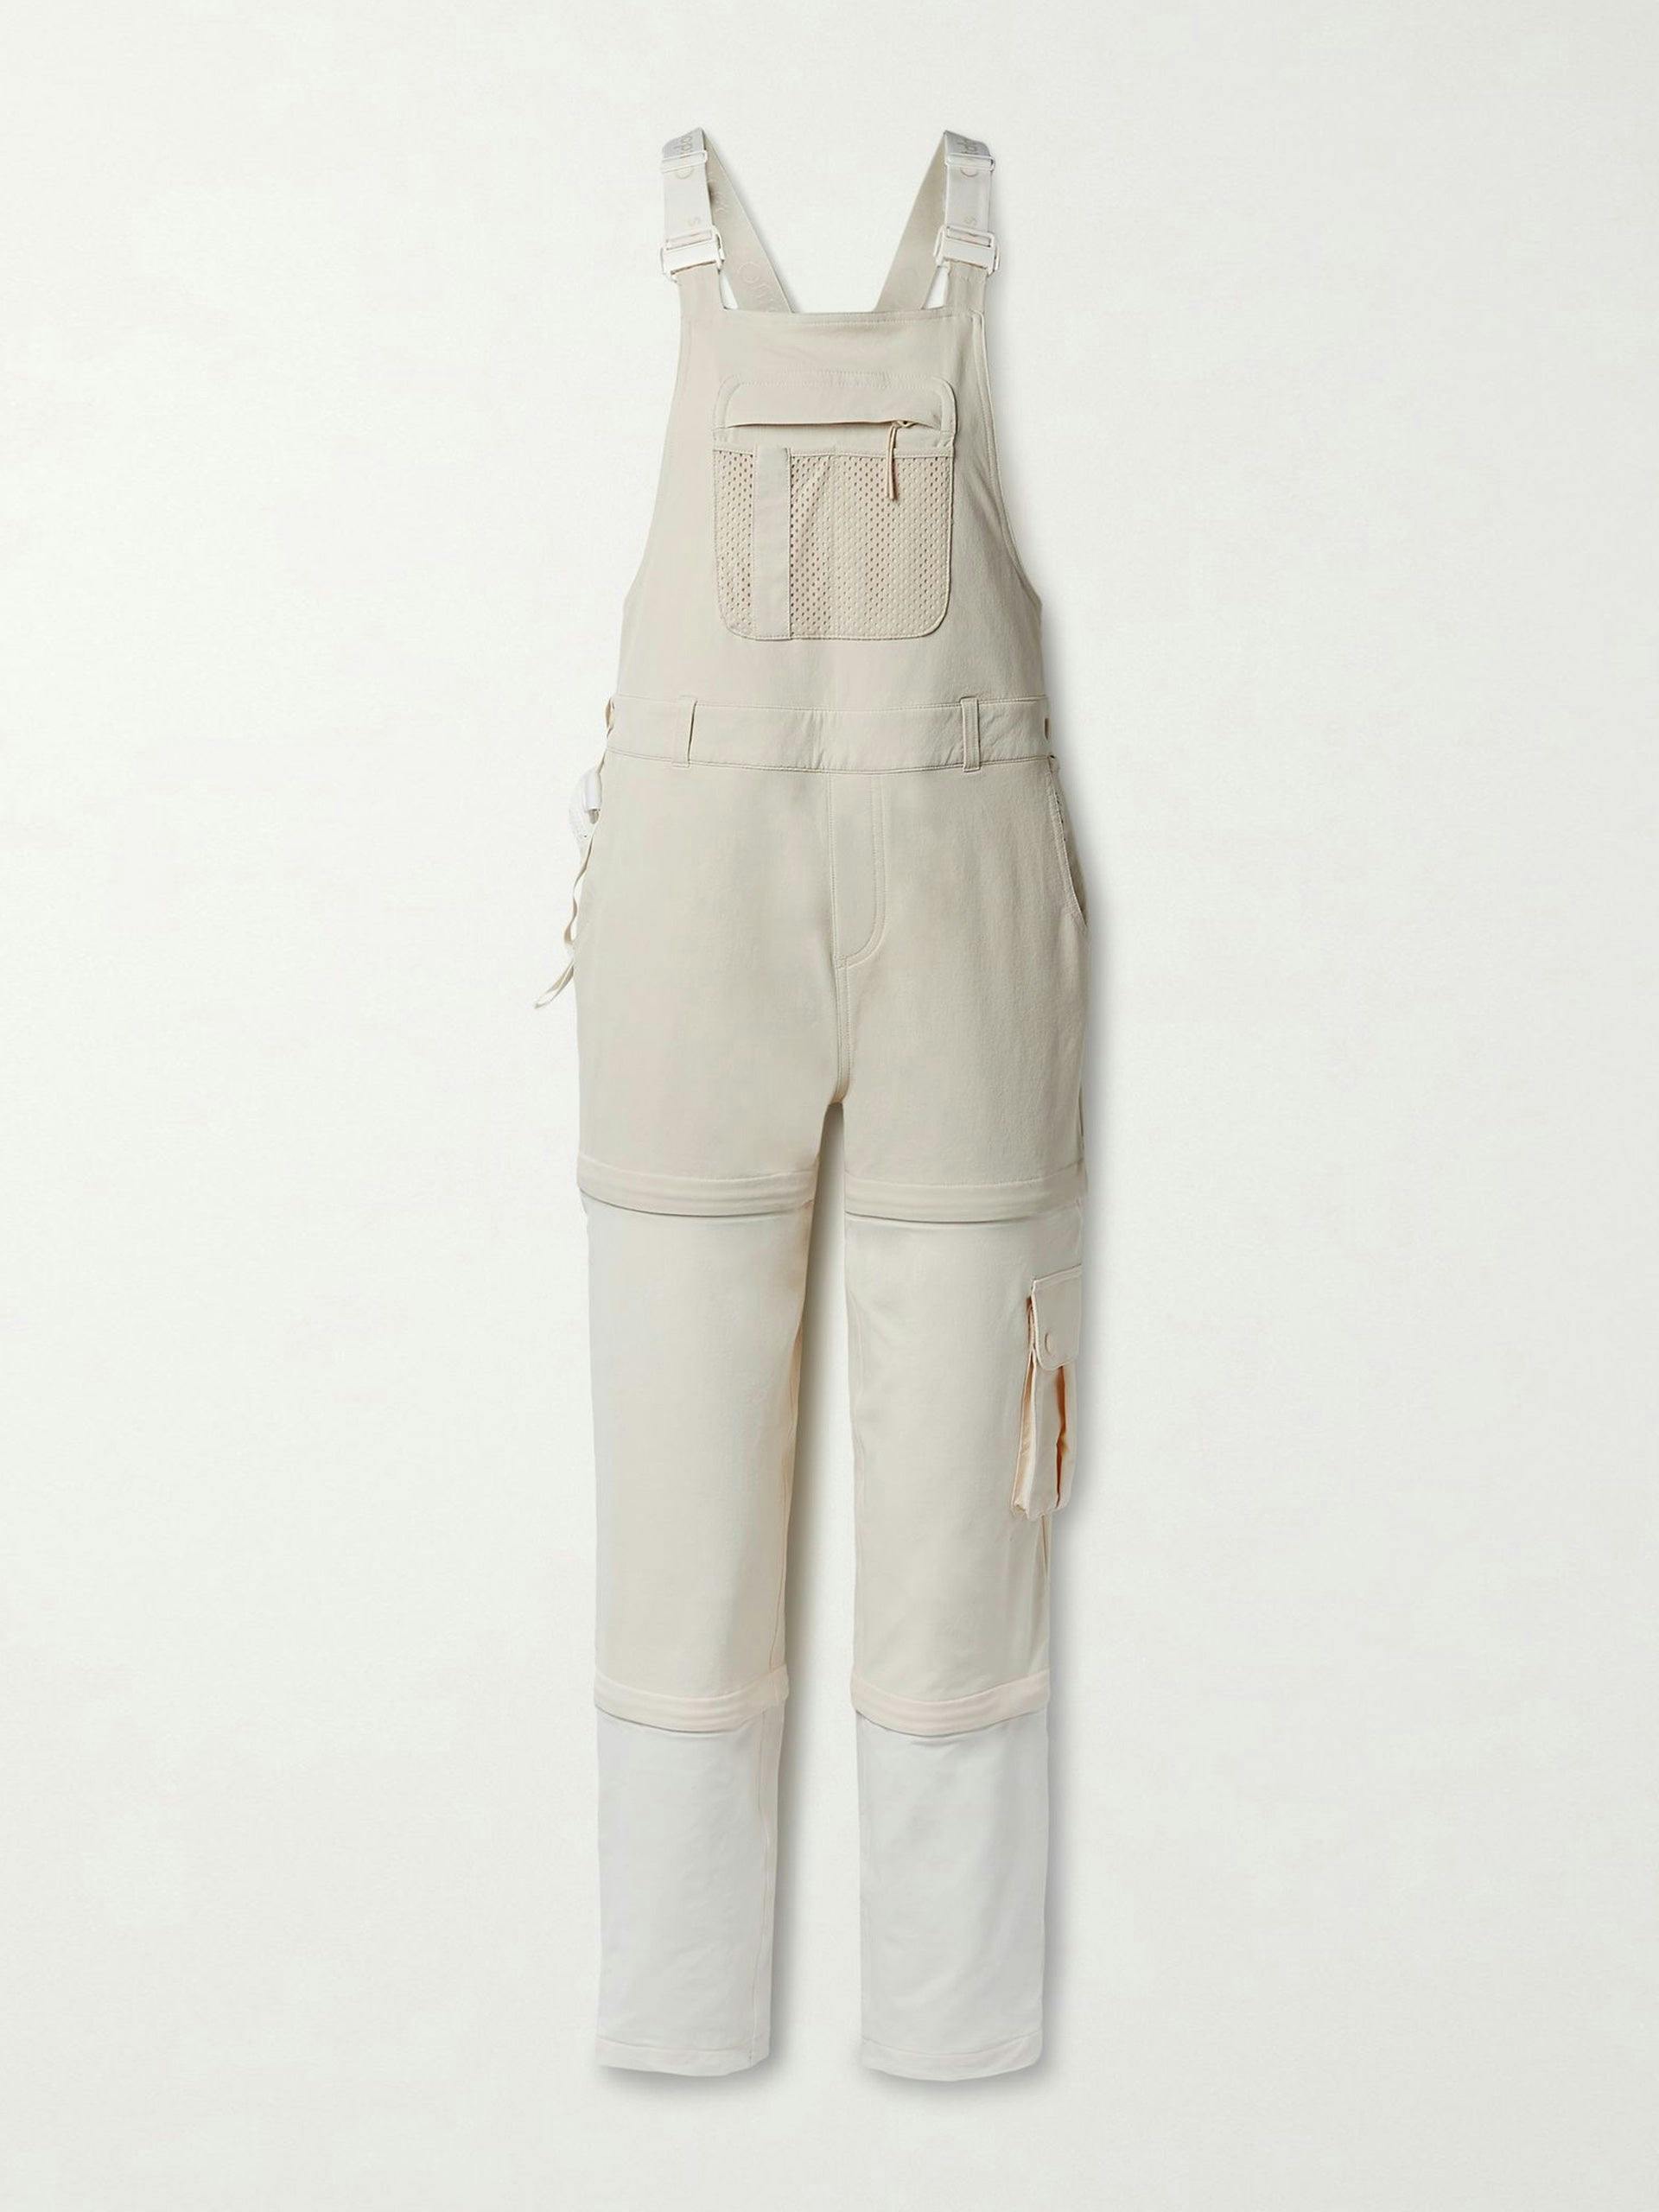 White water-resistant overalls